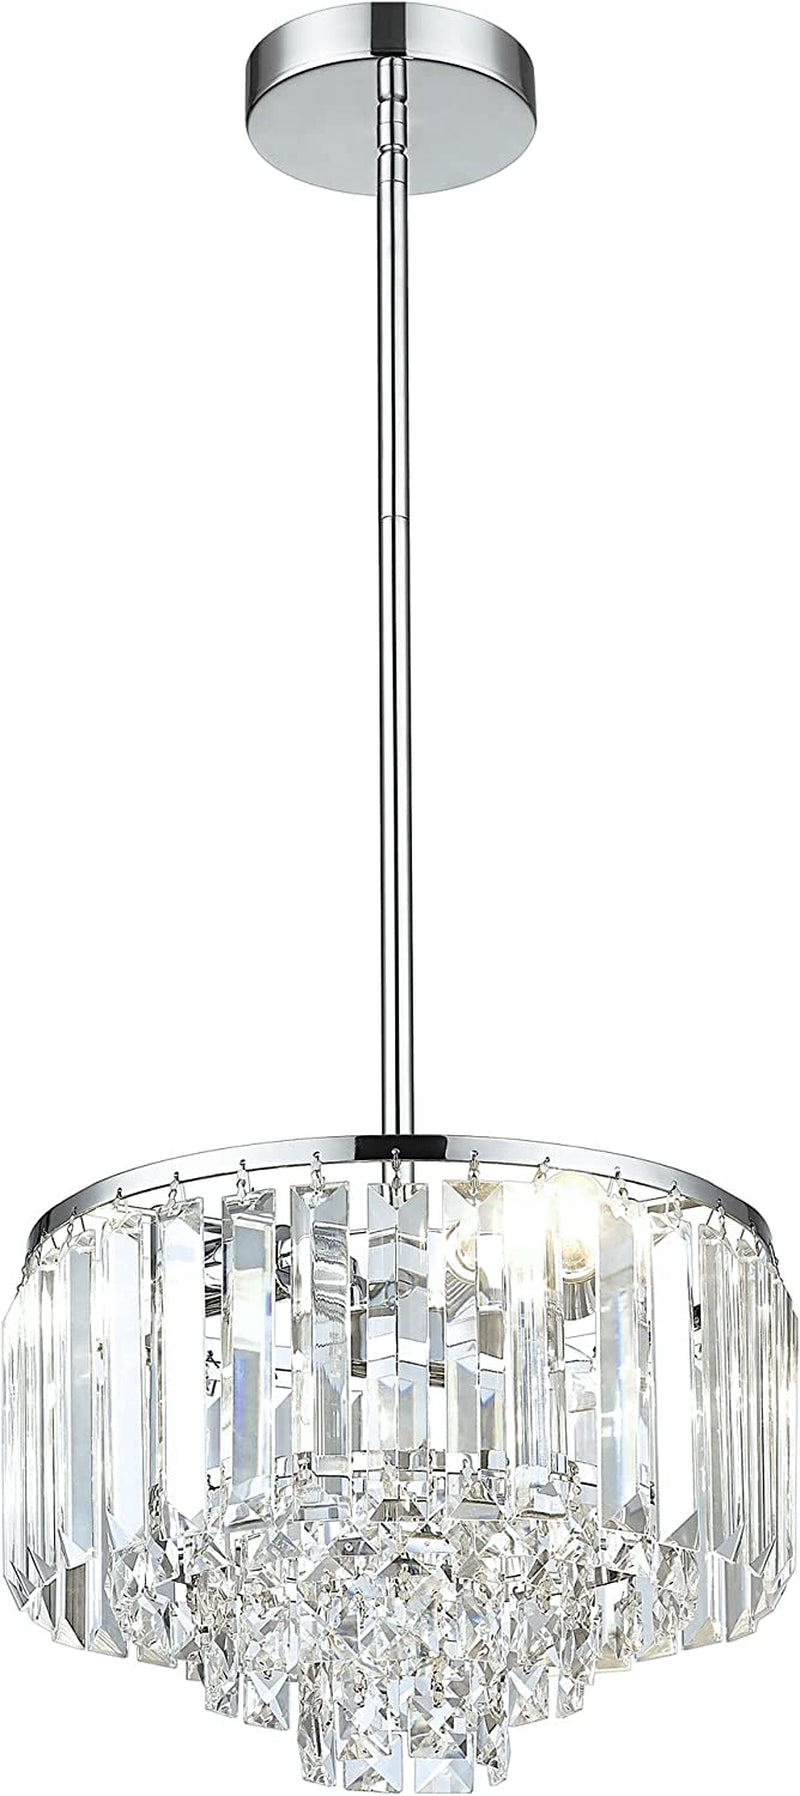 Cargifak Crystal Chandelier, 4-Tier Modern Chandelier with Polished Chrome Finish, Pendant Light for Dinning Room Kitchen Island Bedroom Entryway, CC4215-3W-PC Home & Garden > Lighting > Lighting Fixtures > Chandeliers Cargifak Polished Chrome  